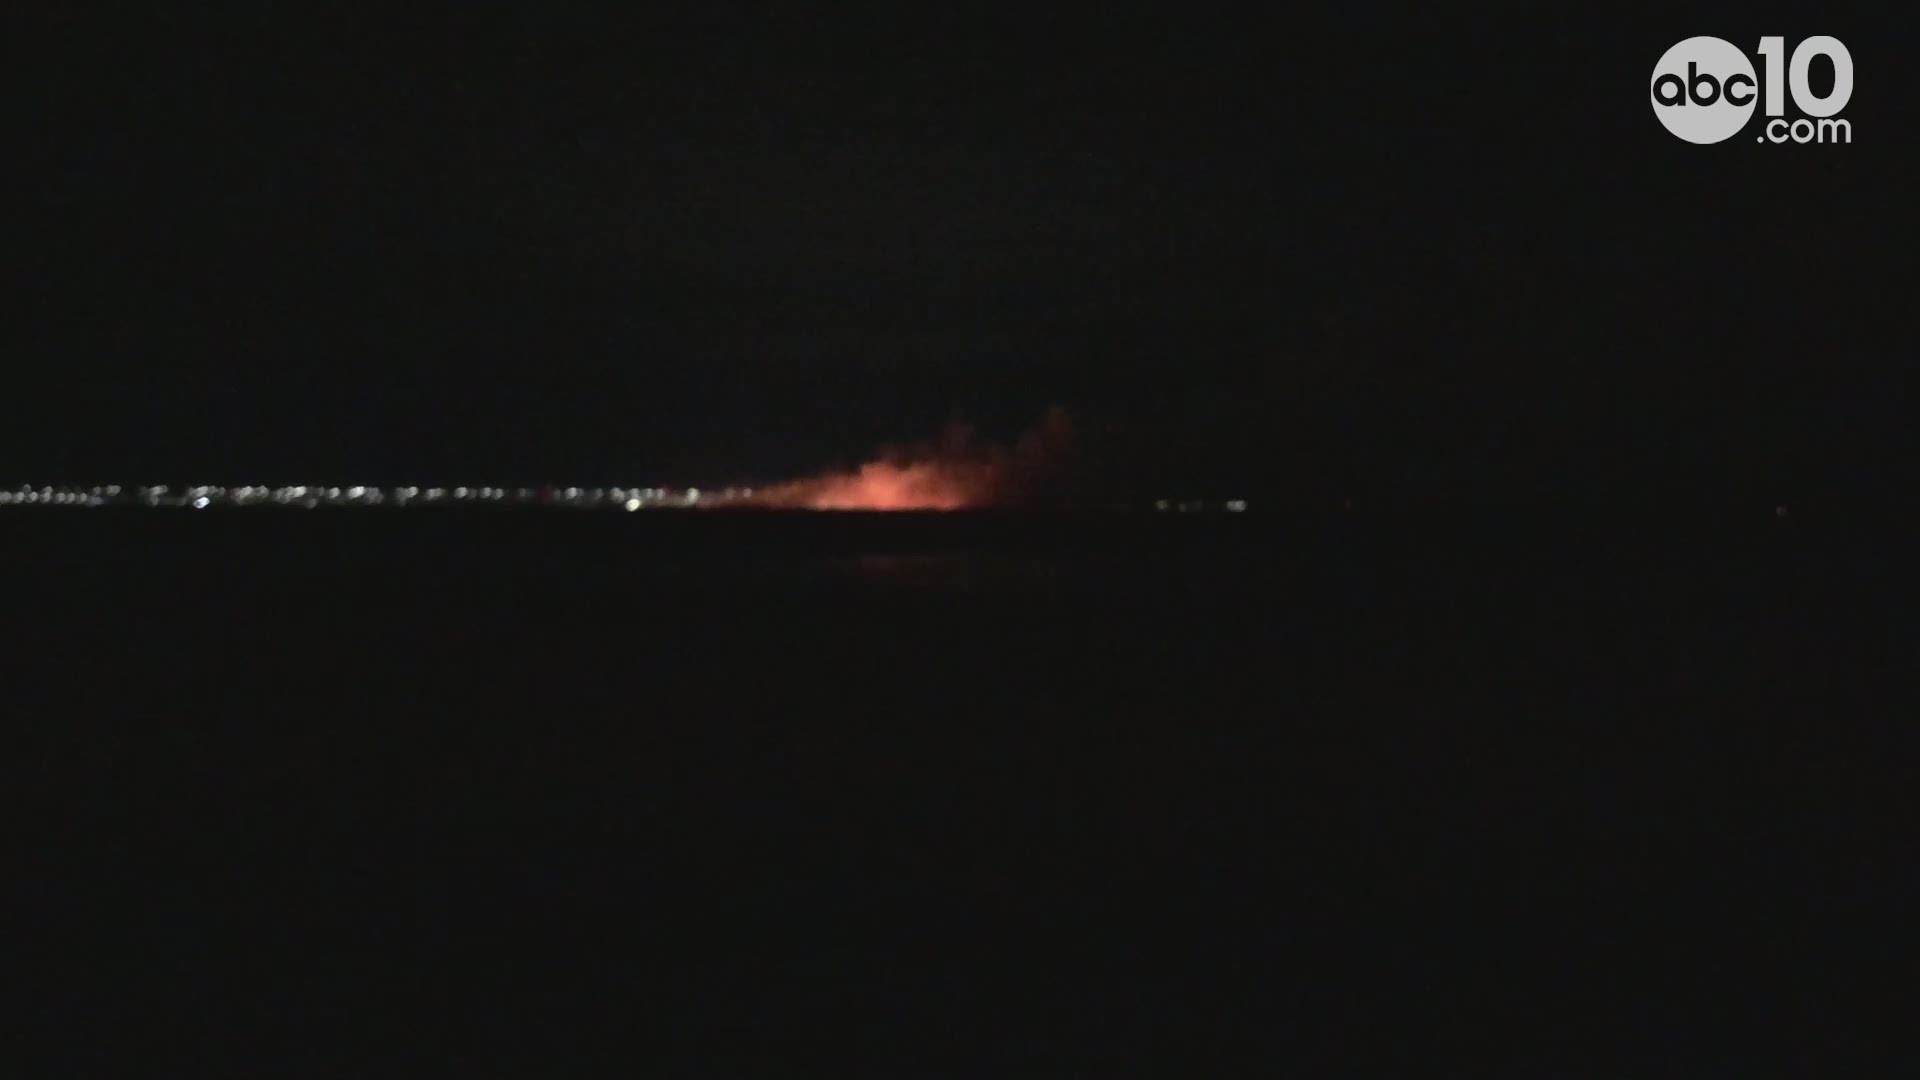 Sacramento Fire crews are working to contain the fire that started in a field near the airport.